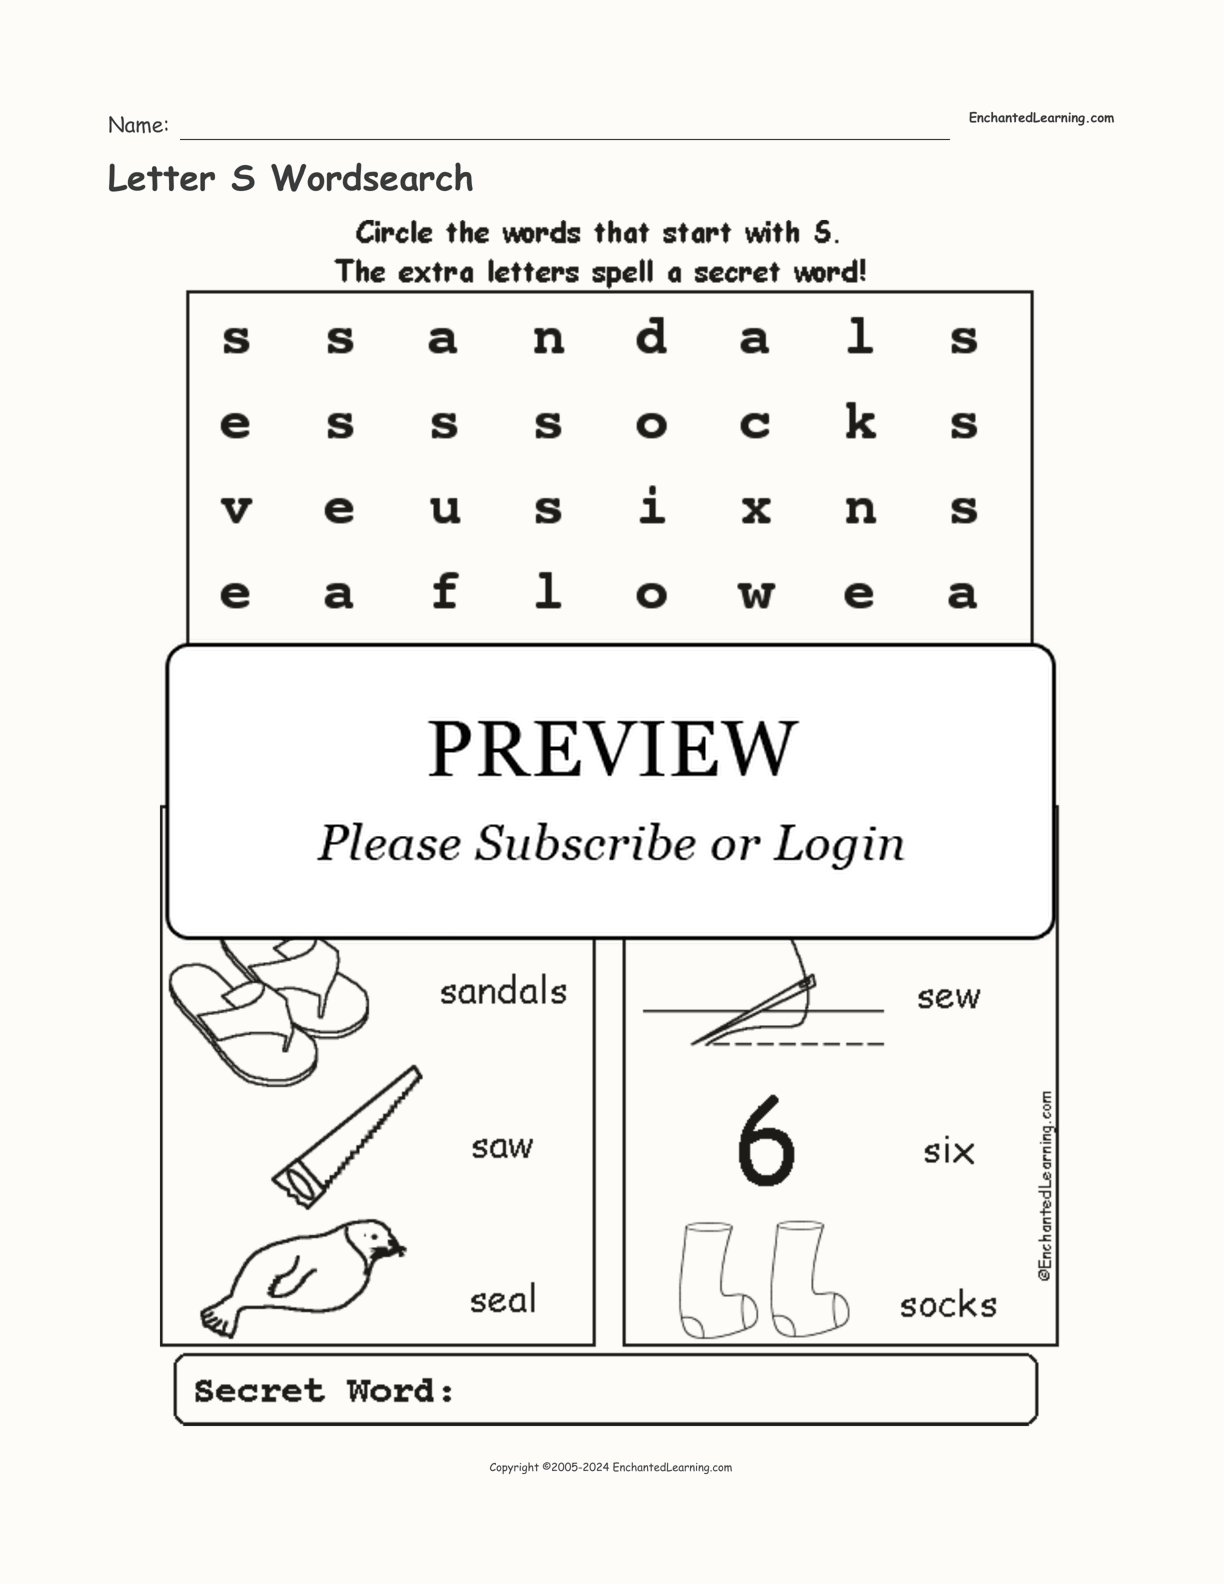 Letter S Wordsearch interactive worksheet page 1